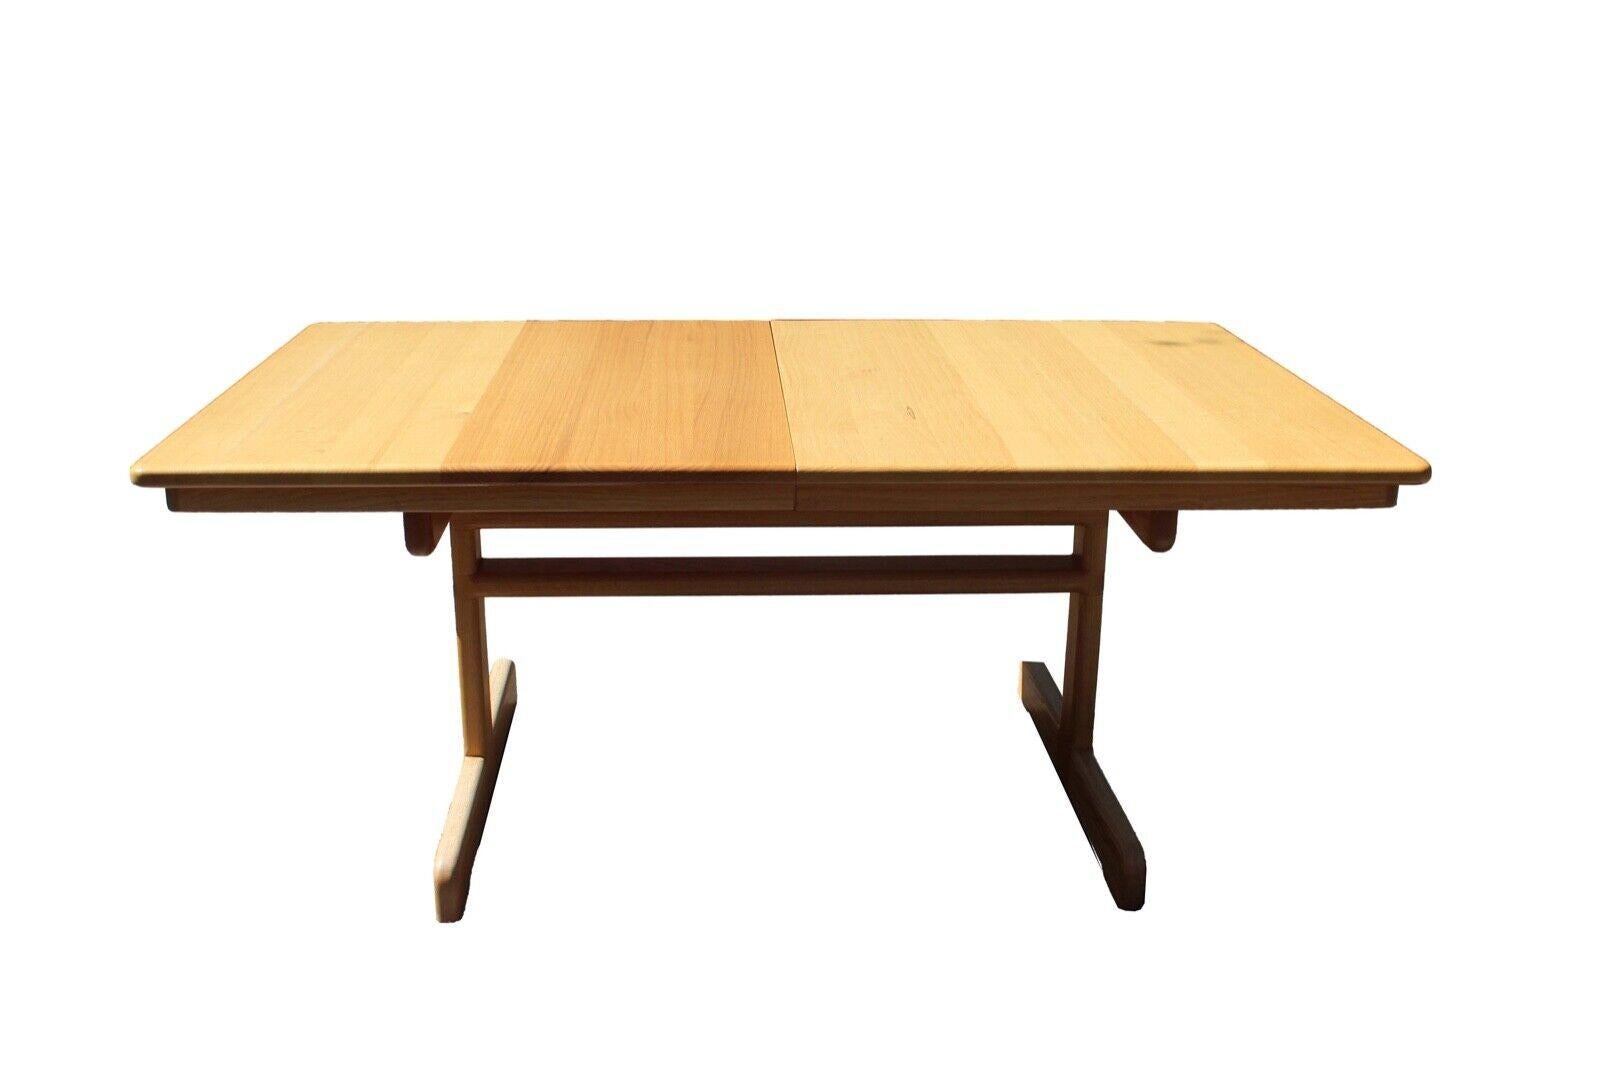 We presents this truly exceptionally handmade expandable dining table from Douglas Lambect, Jerry Mandell and Associates from Bloomington, Indiana. In excellent condition. Has 3 leafs. Dimensions: table: 71